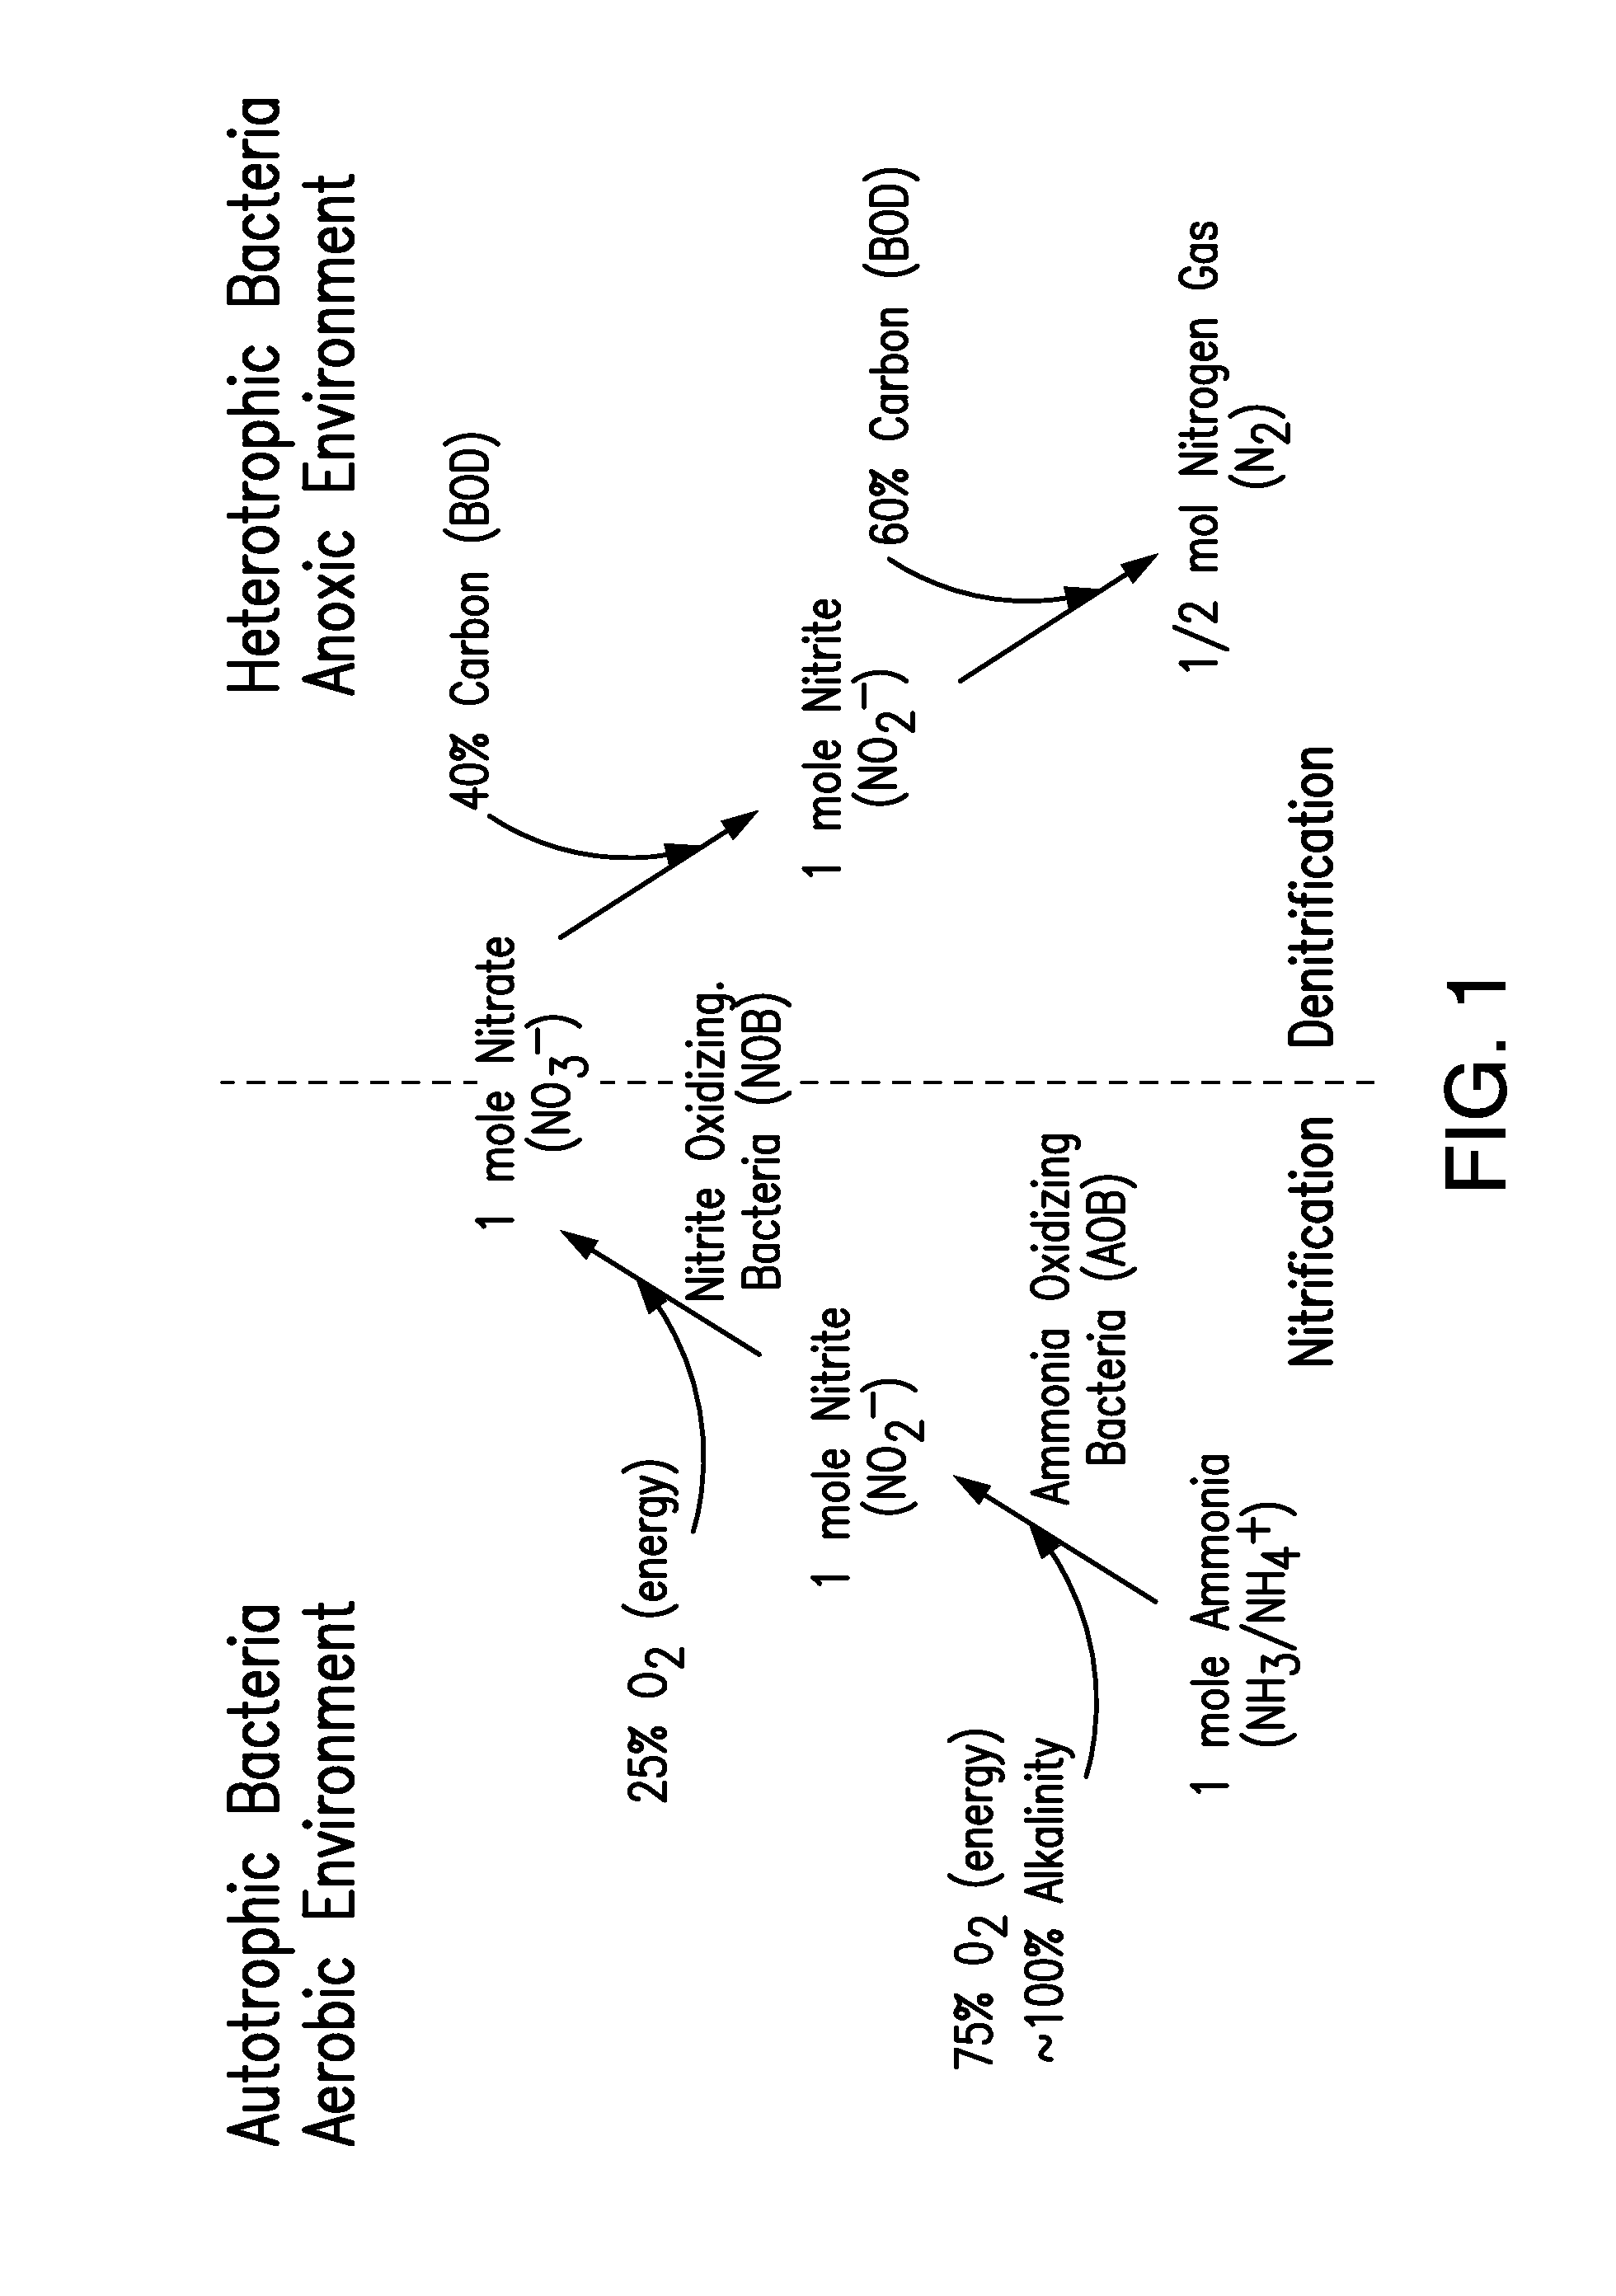 Method and apparatus for maximizing nitrogen removal from wastewater